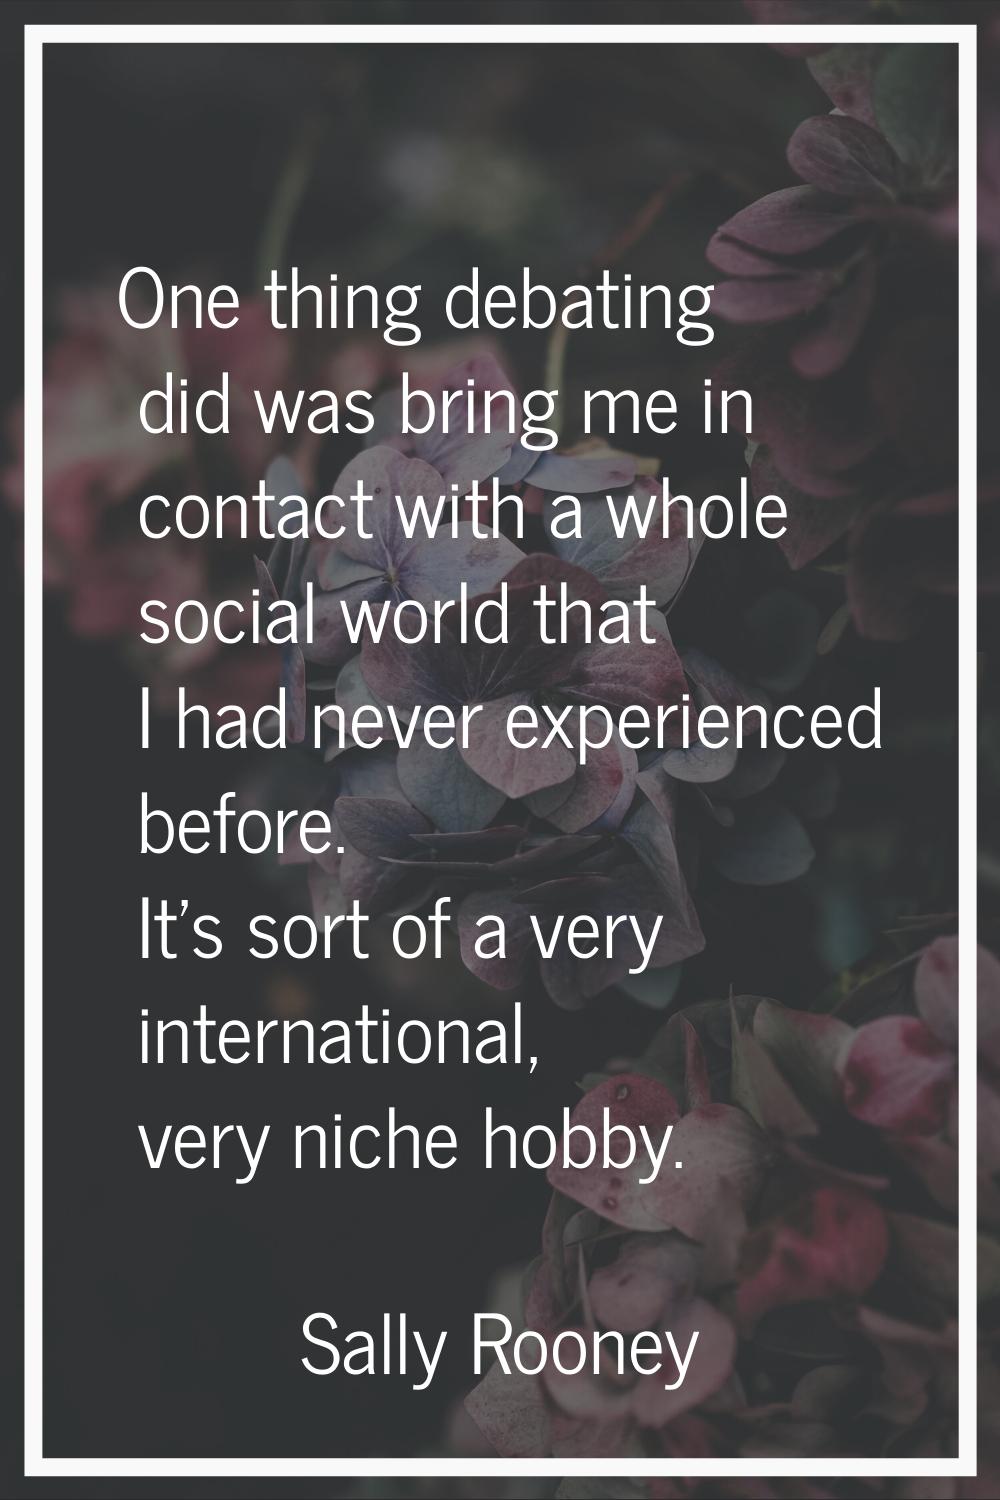 One thing debating did was bring me in contact with a whole social world that I had never experienc